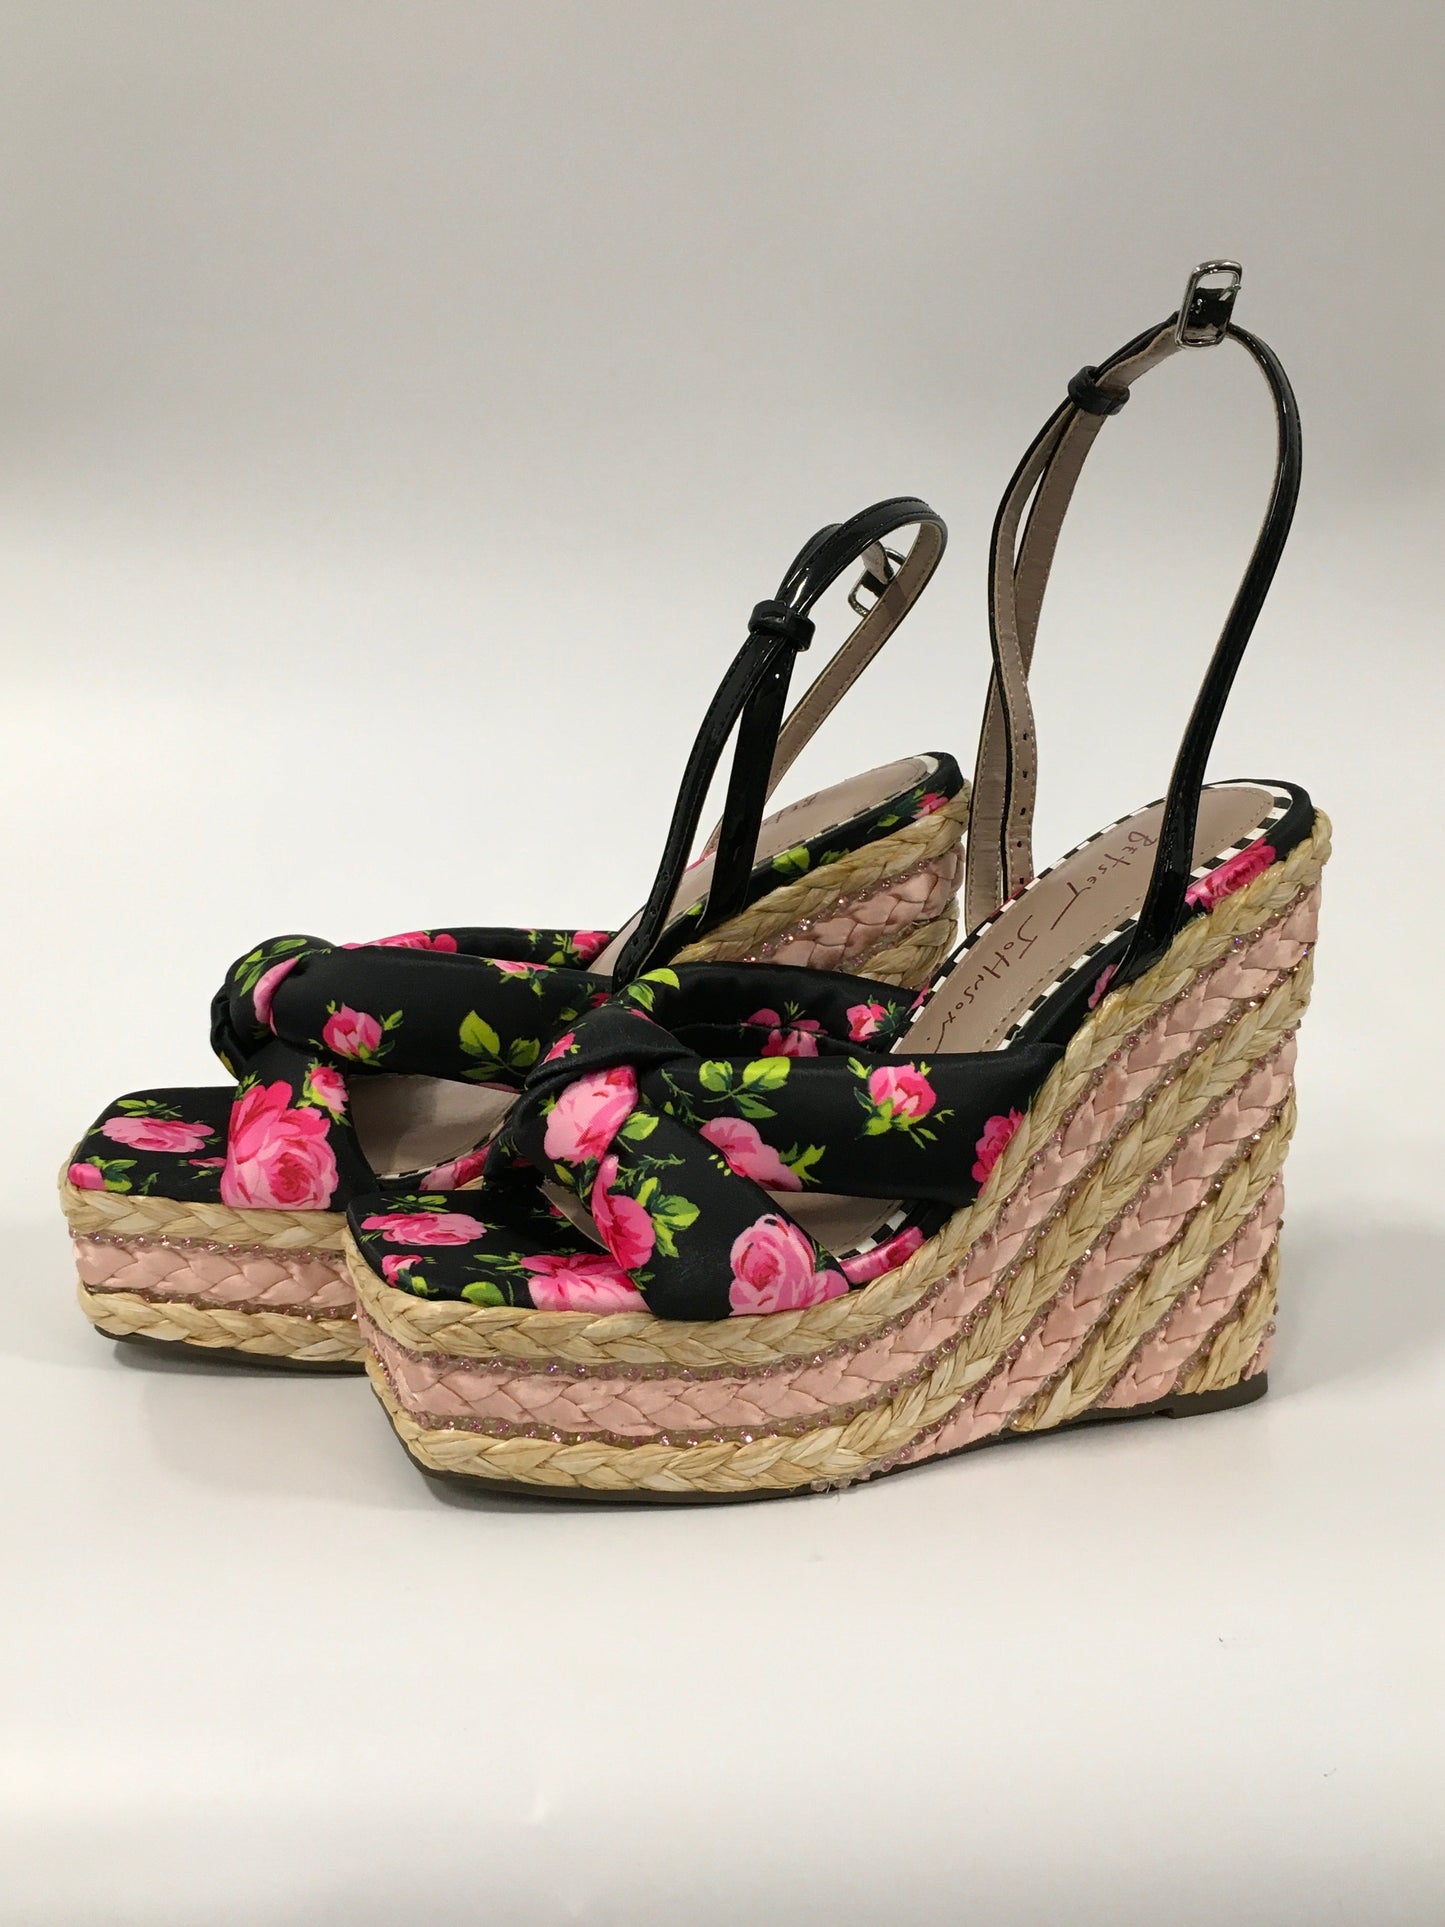 Floral Print Sandals Heels Wedge Betsey Johnson, Size 5.5